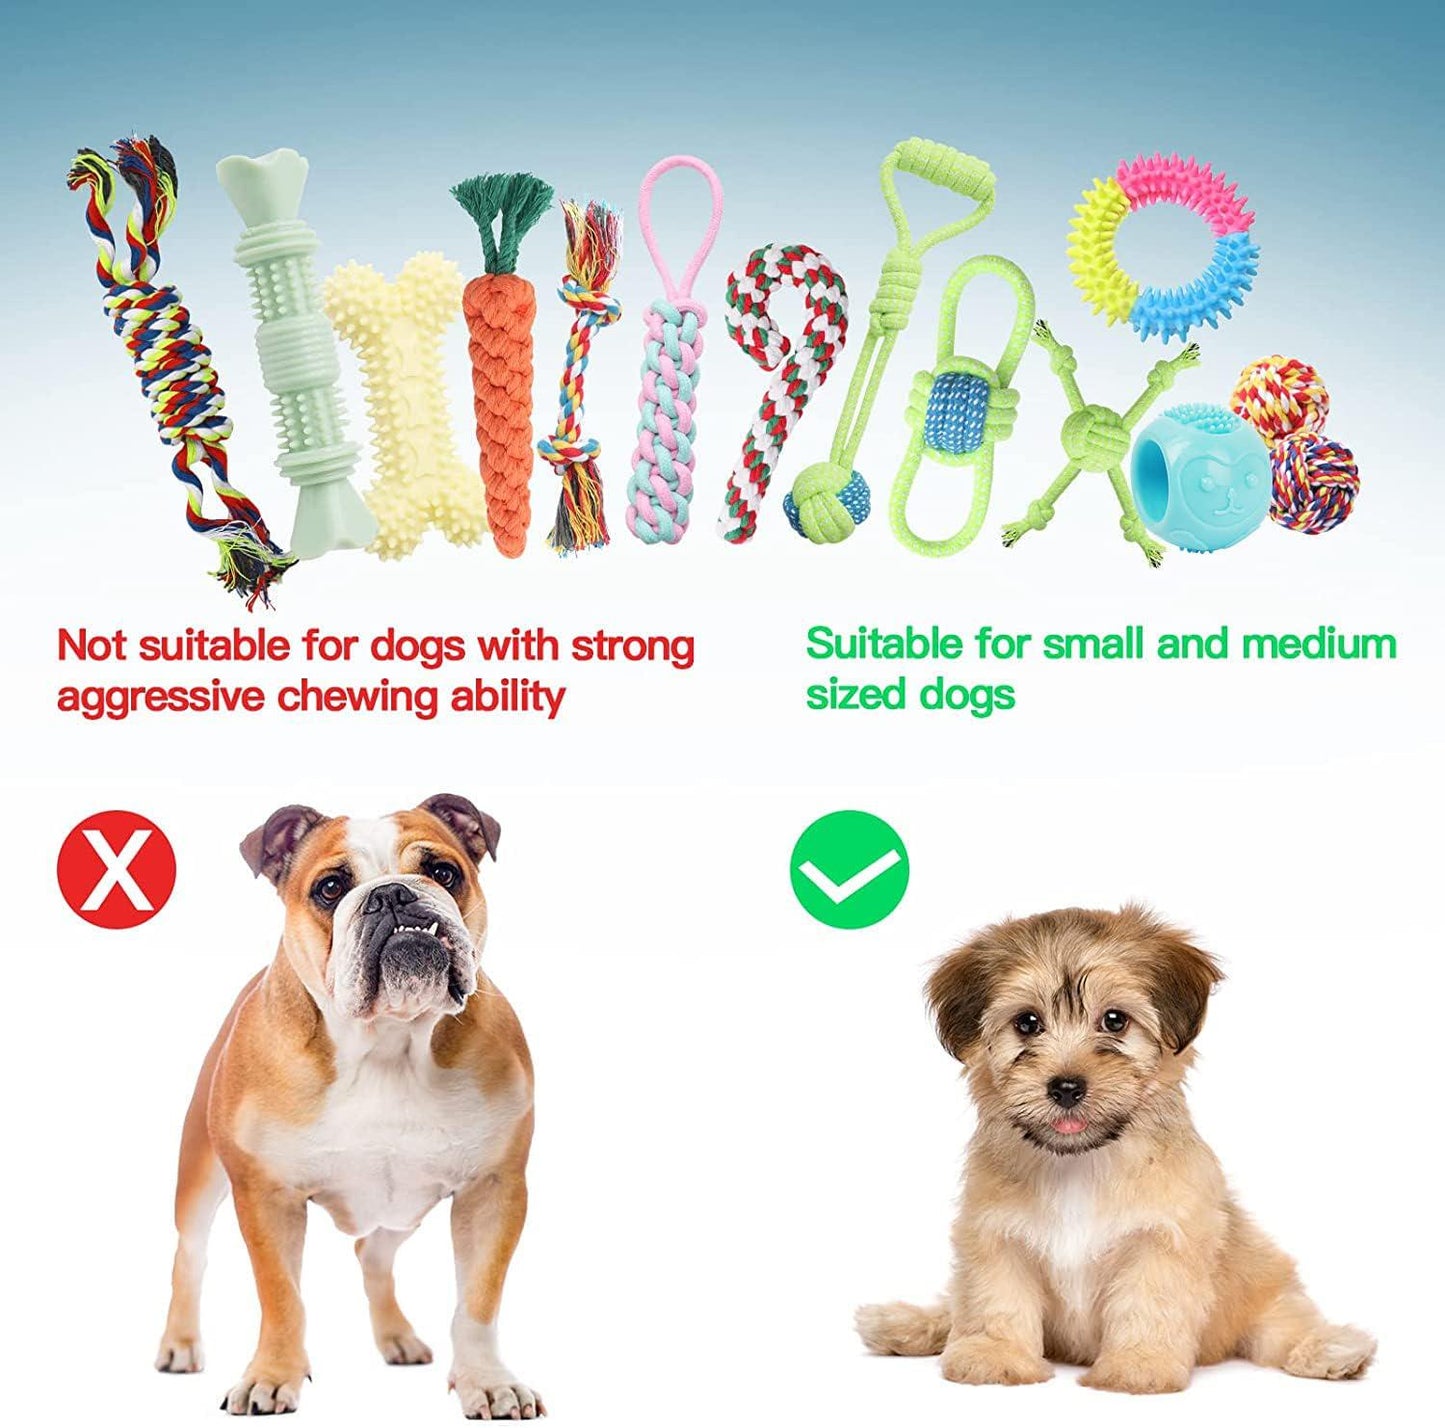 Dog Chew Toys 20 Pack Indestructible Pet Interactive Tug of War Rope Toys for Puppies Chewers